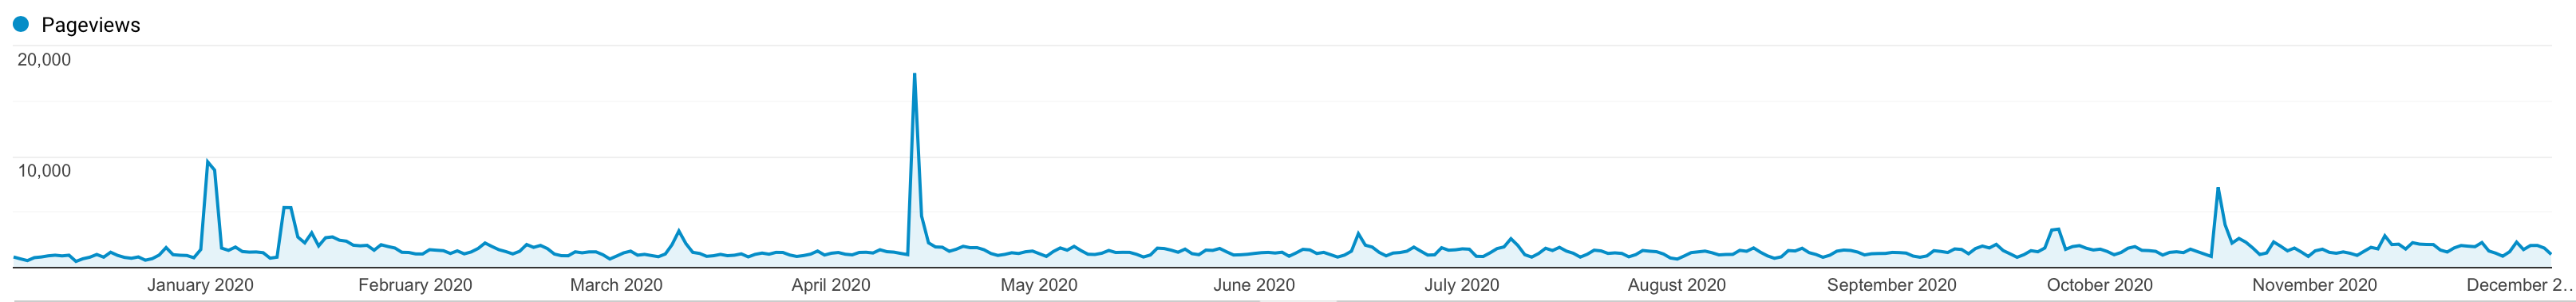 Daily pageviews for Irrational Exuberance.